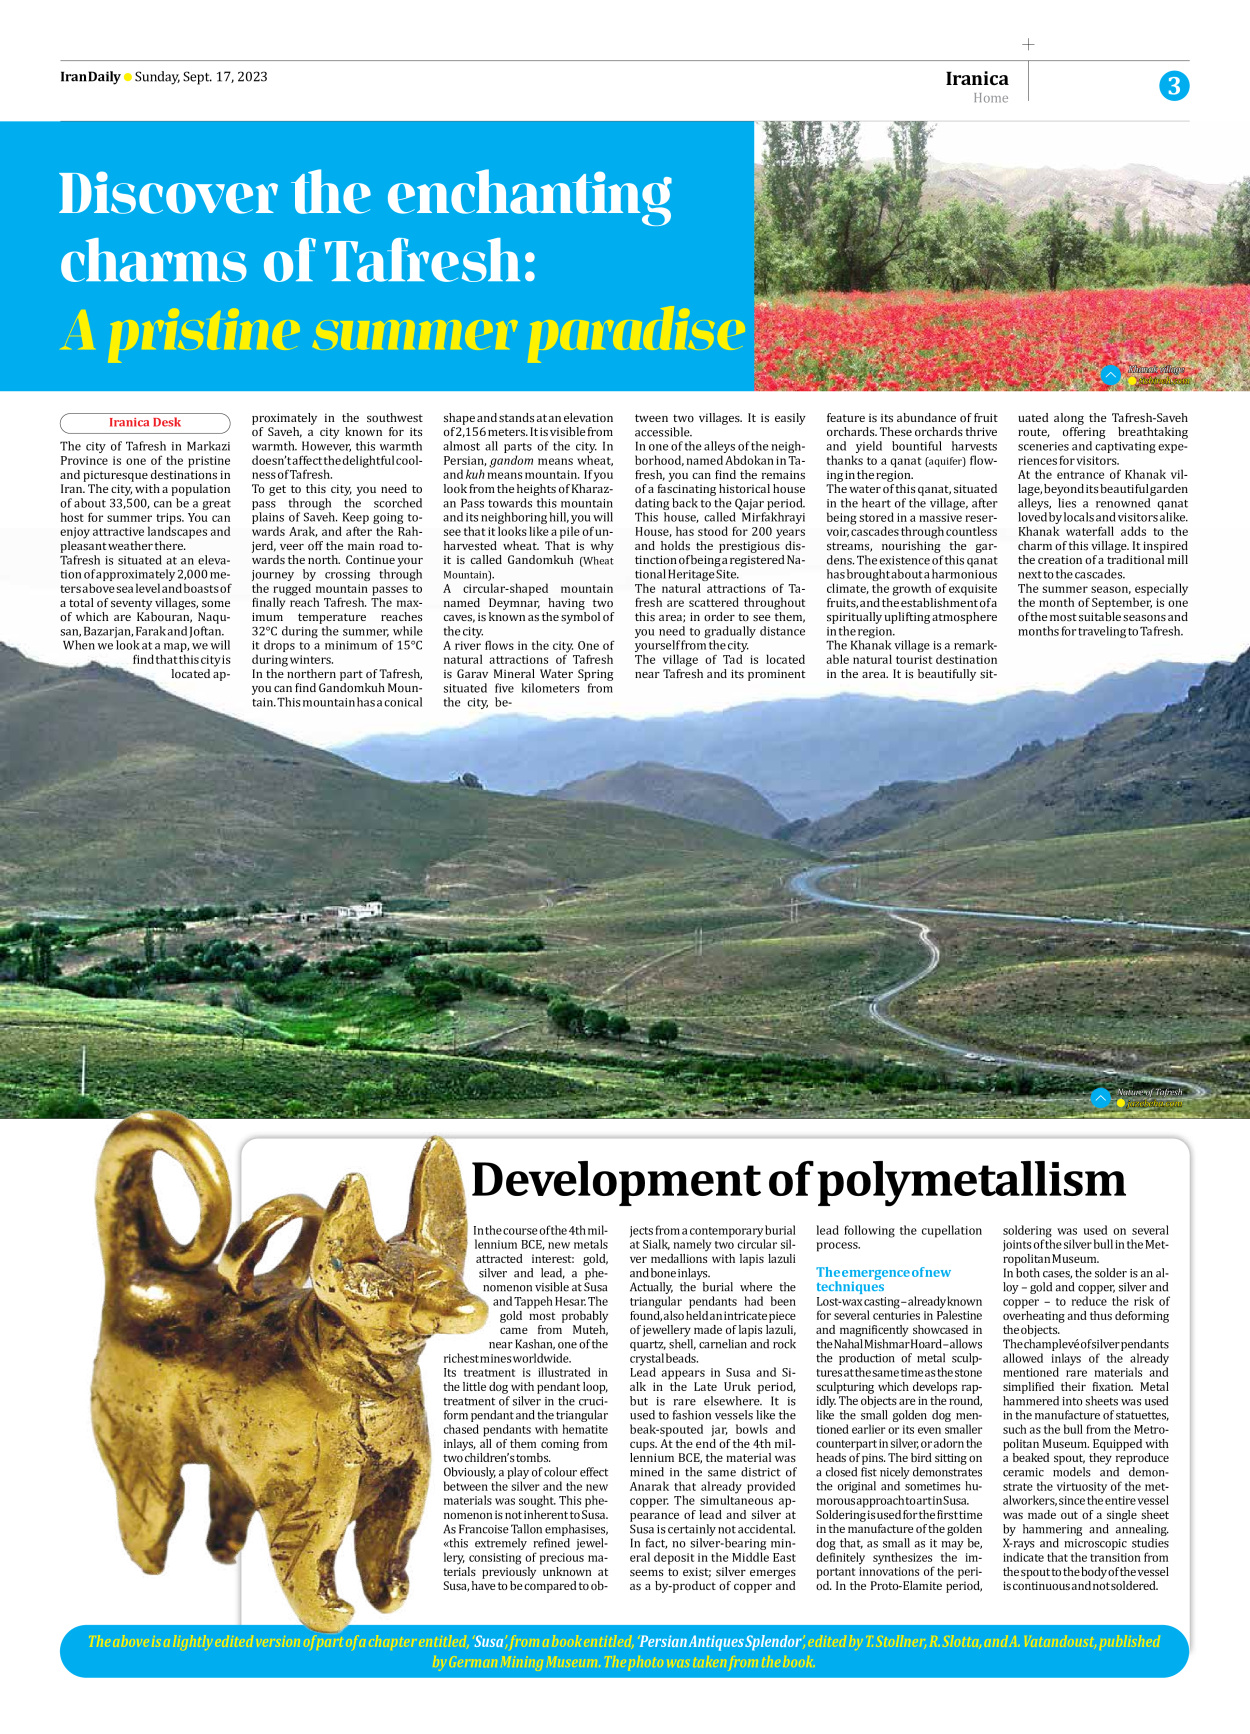 Iran Daily - Number Seven Thousand Three Hundred and Eighty Seven - 17 September 2023 - Page 3